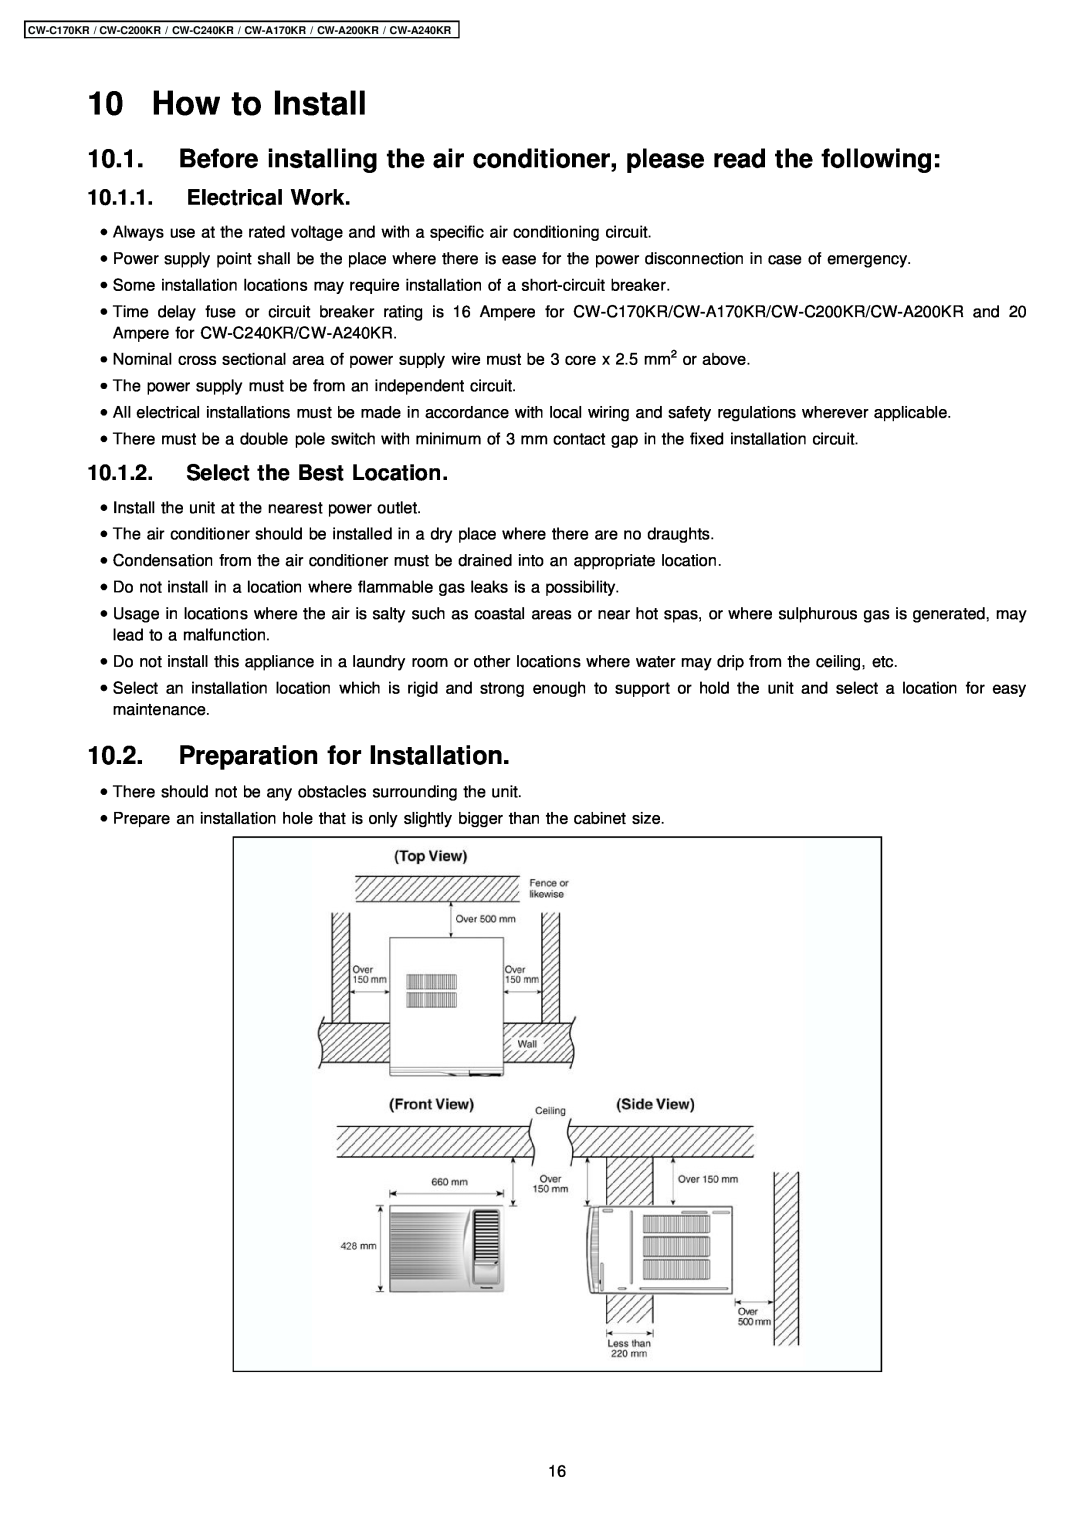 Panasonic CW-C240KR, CW-A170KR How to Install, Preparation for Installation, Electrical Work, Select the Best Location 